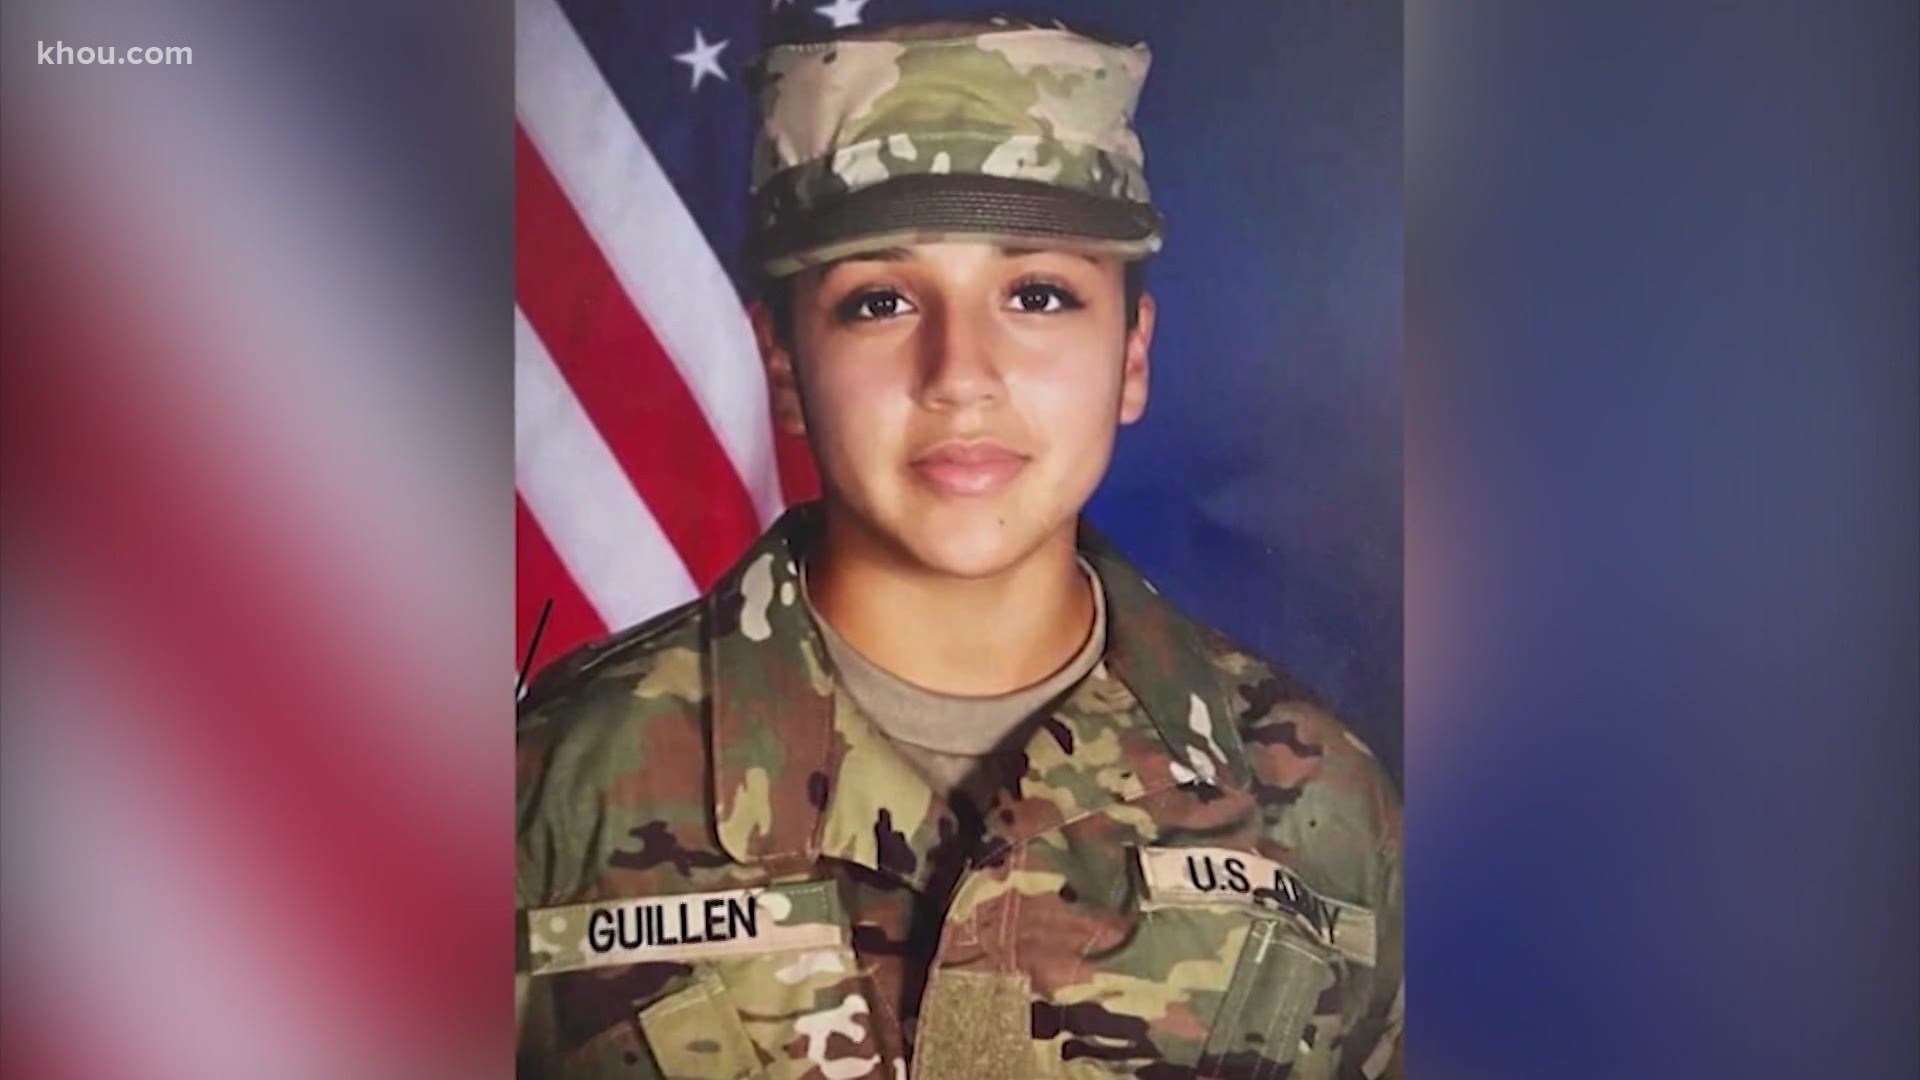 The family of the Fort Hood soldier from Houston said from the beginning they believed there was a cover-up in her disappearance.